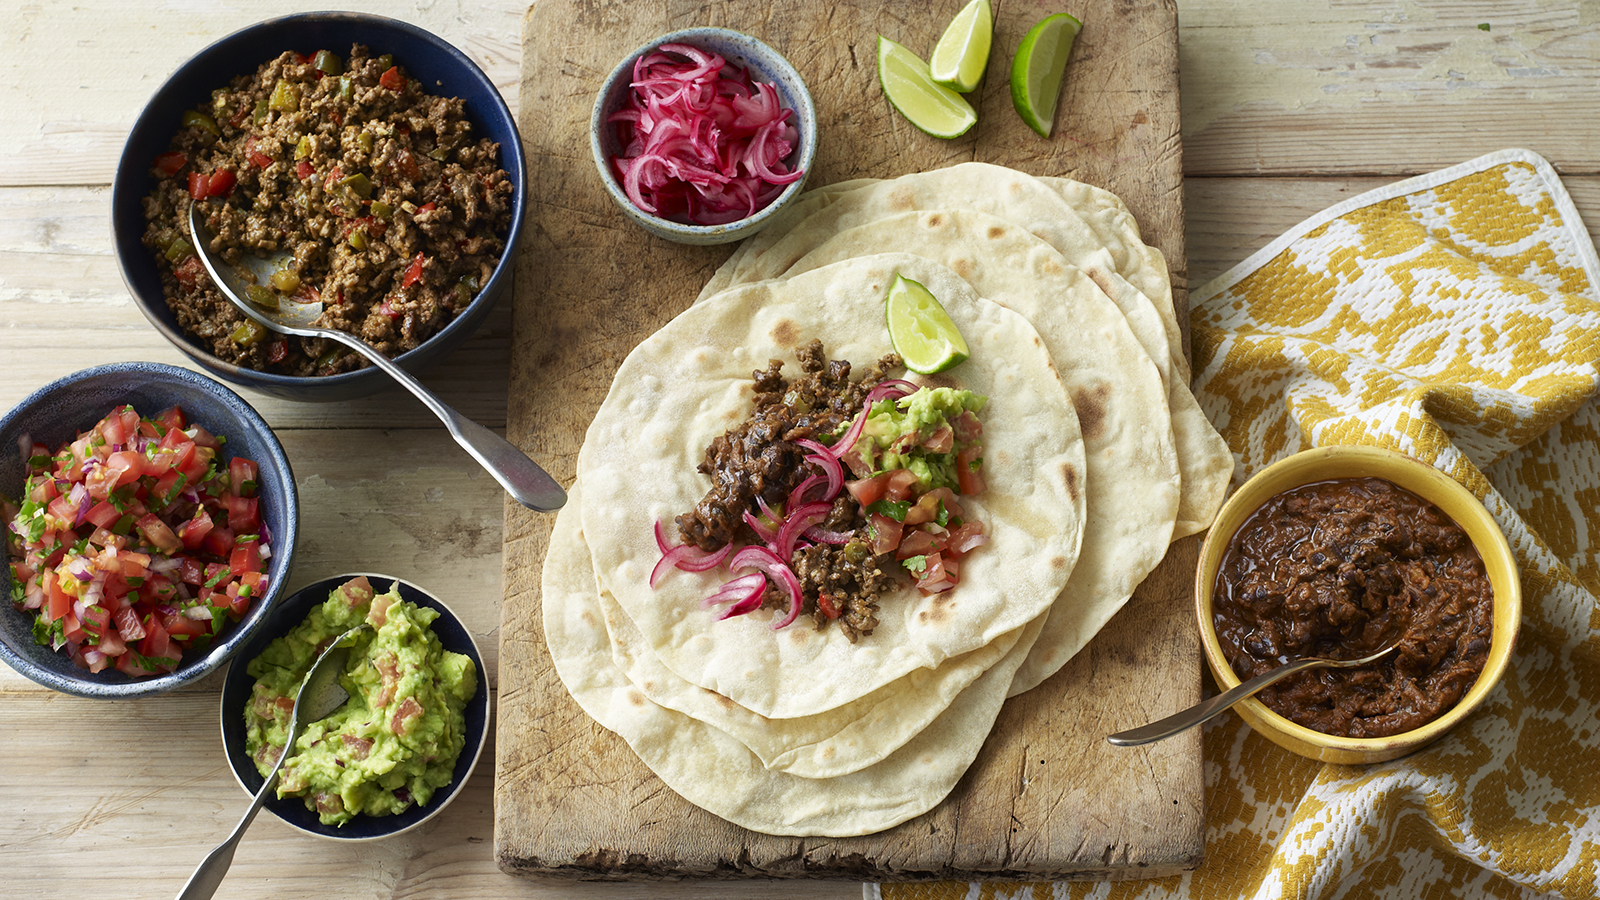 Homemade soft tacos with beef and black beans recipe - BBC Food